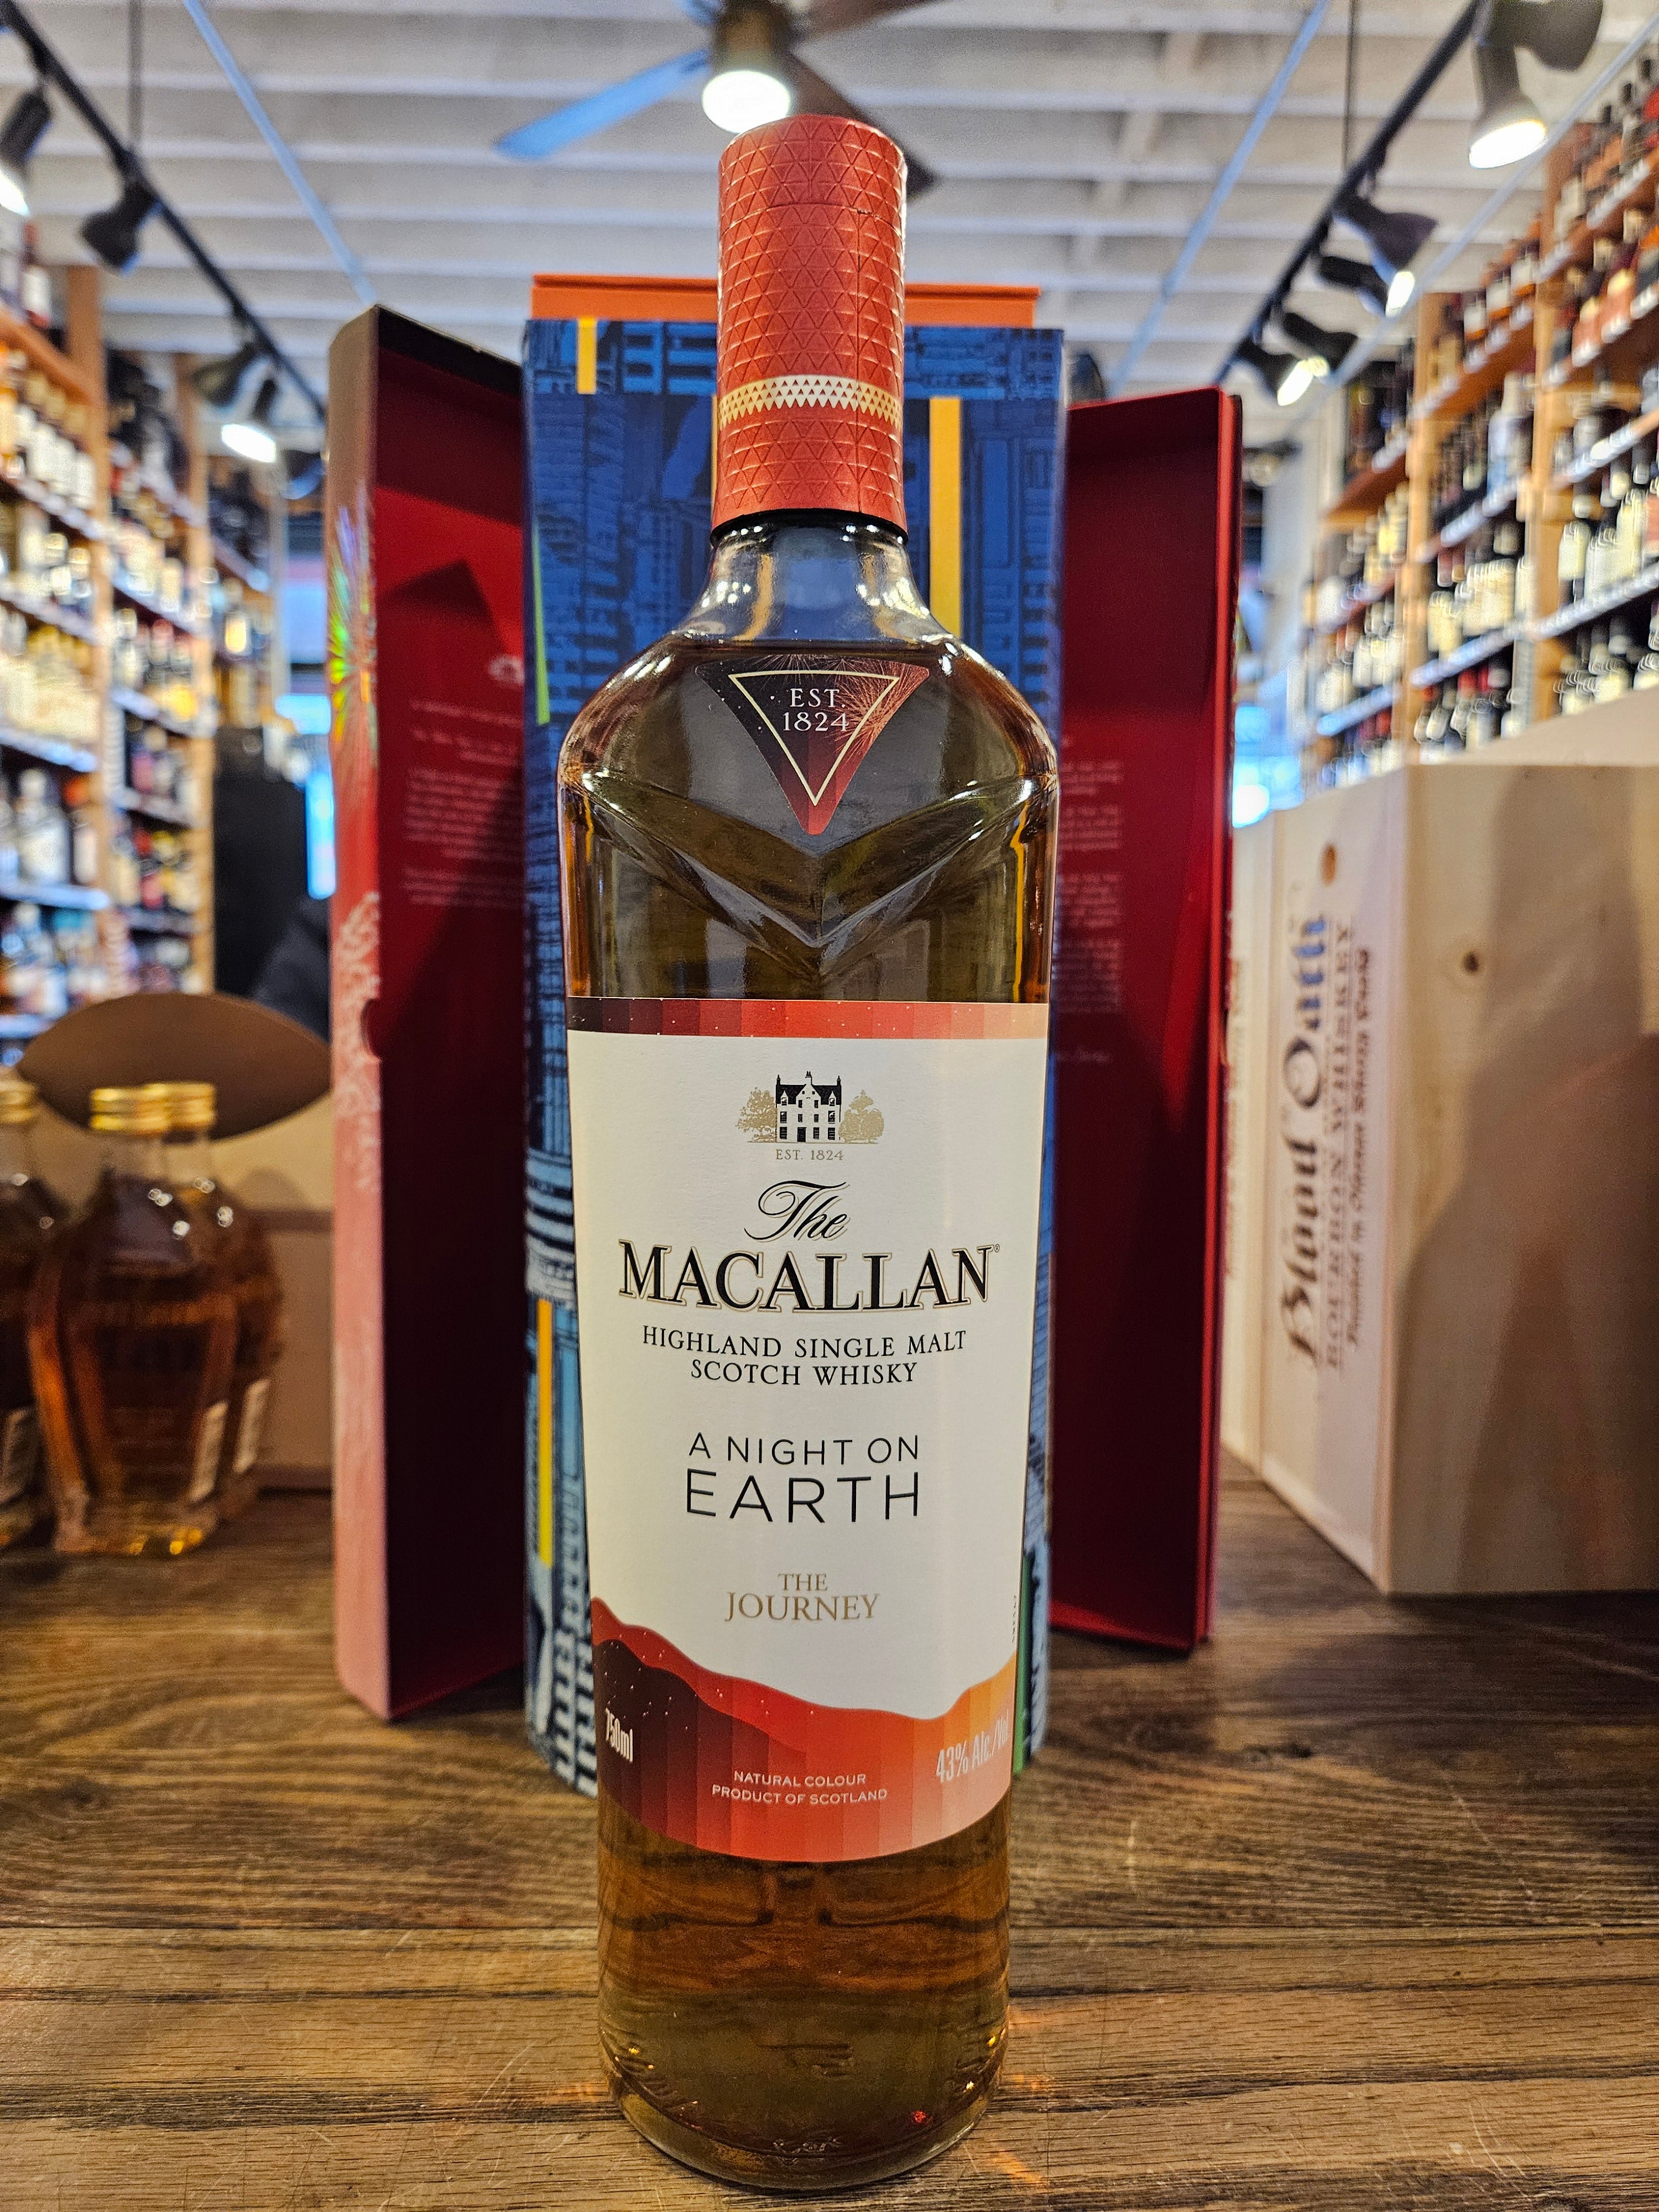 Macallan A Night on Earth - The Journey 750mL a tall clear glass bottle with a white label and orange top